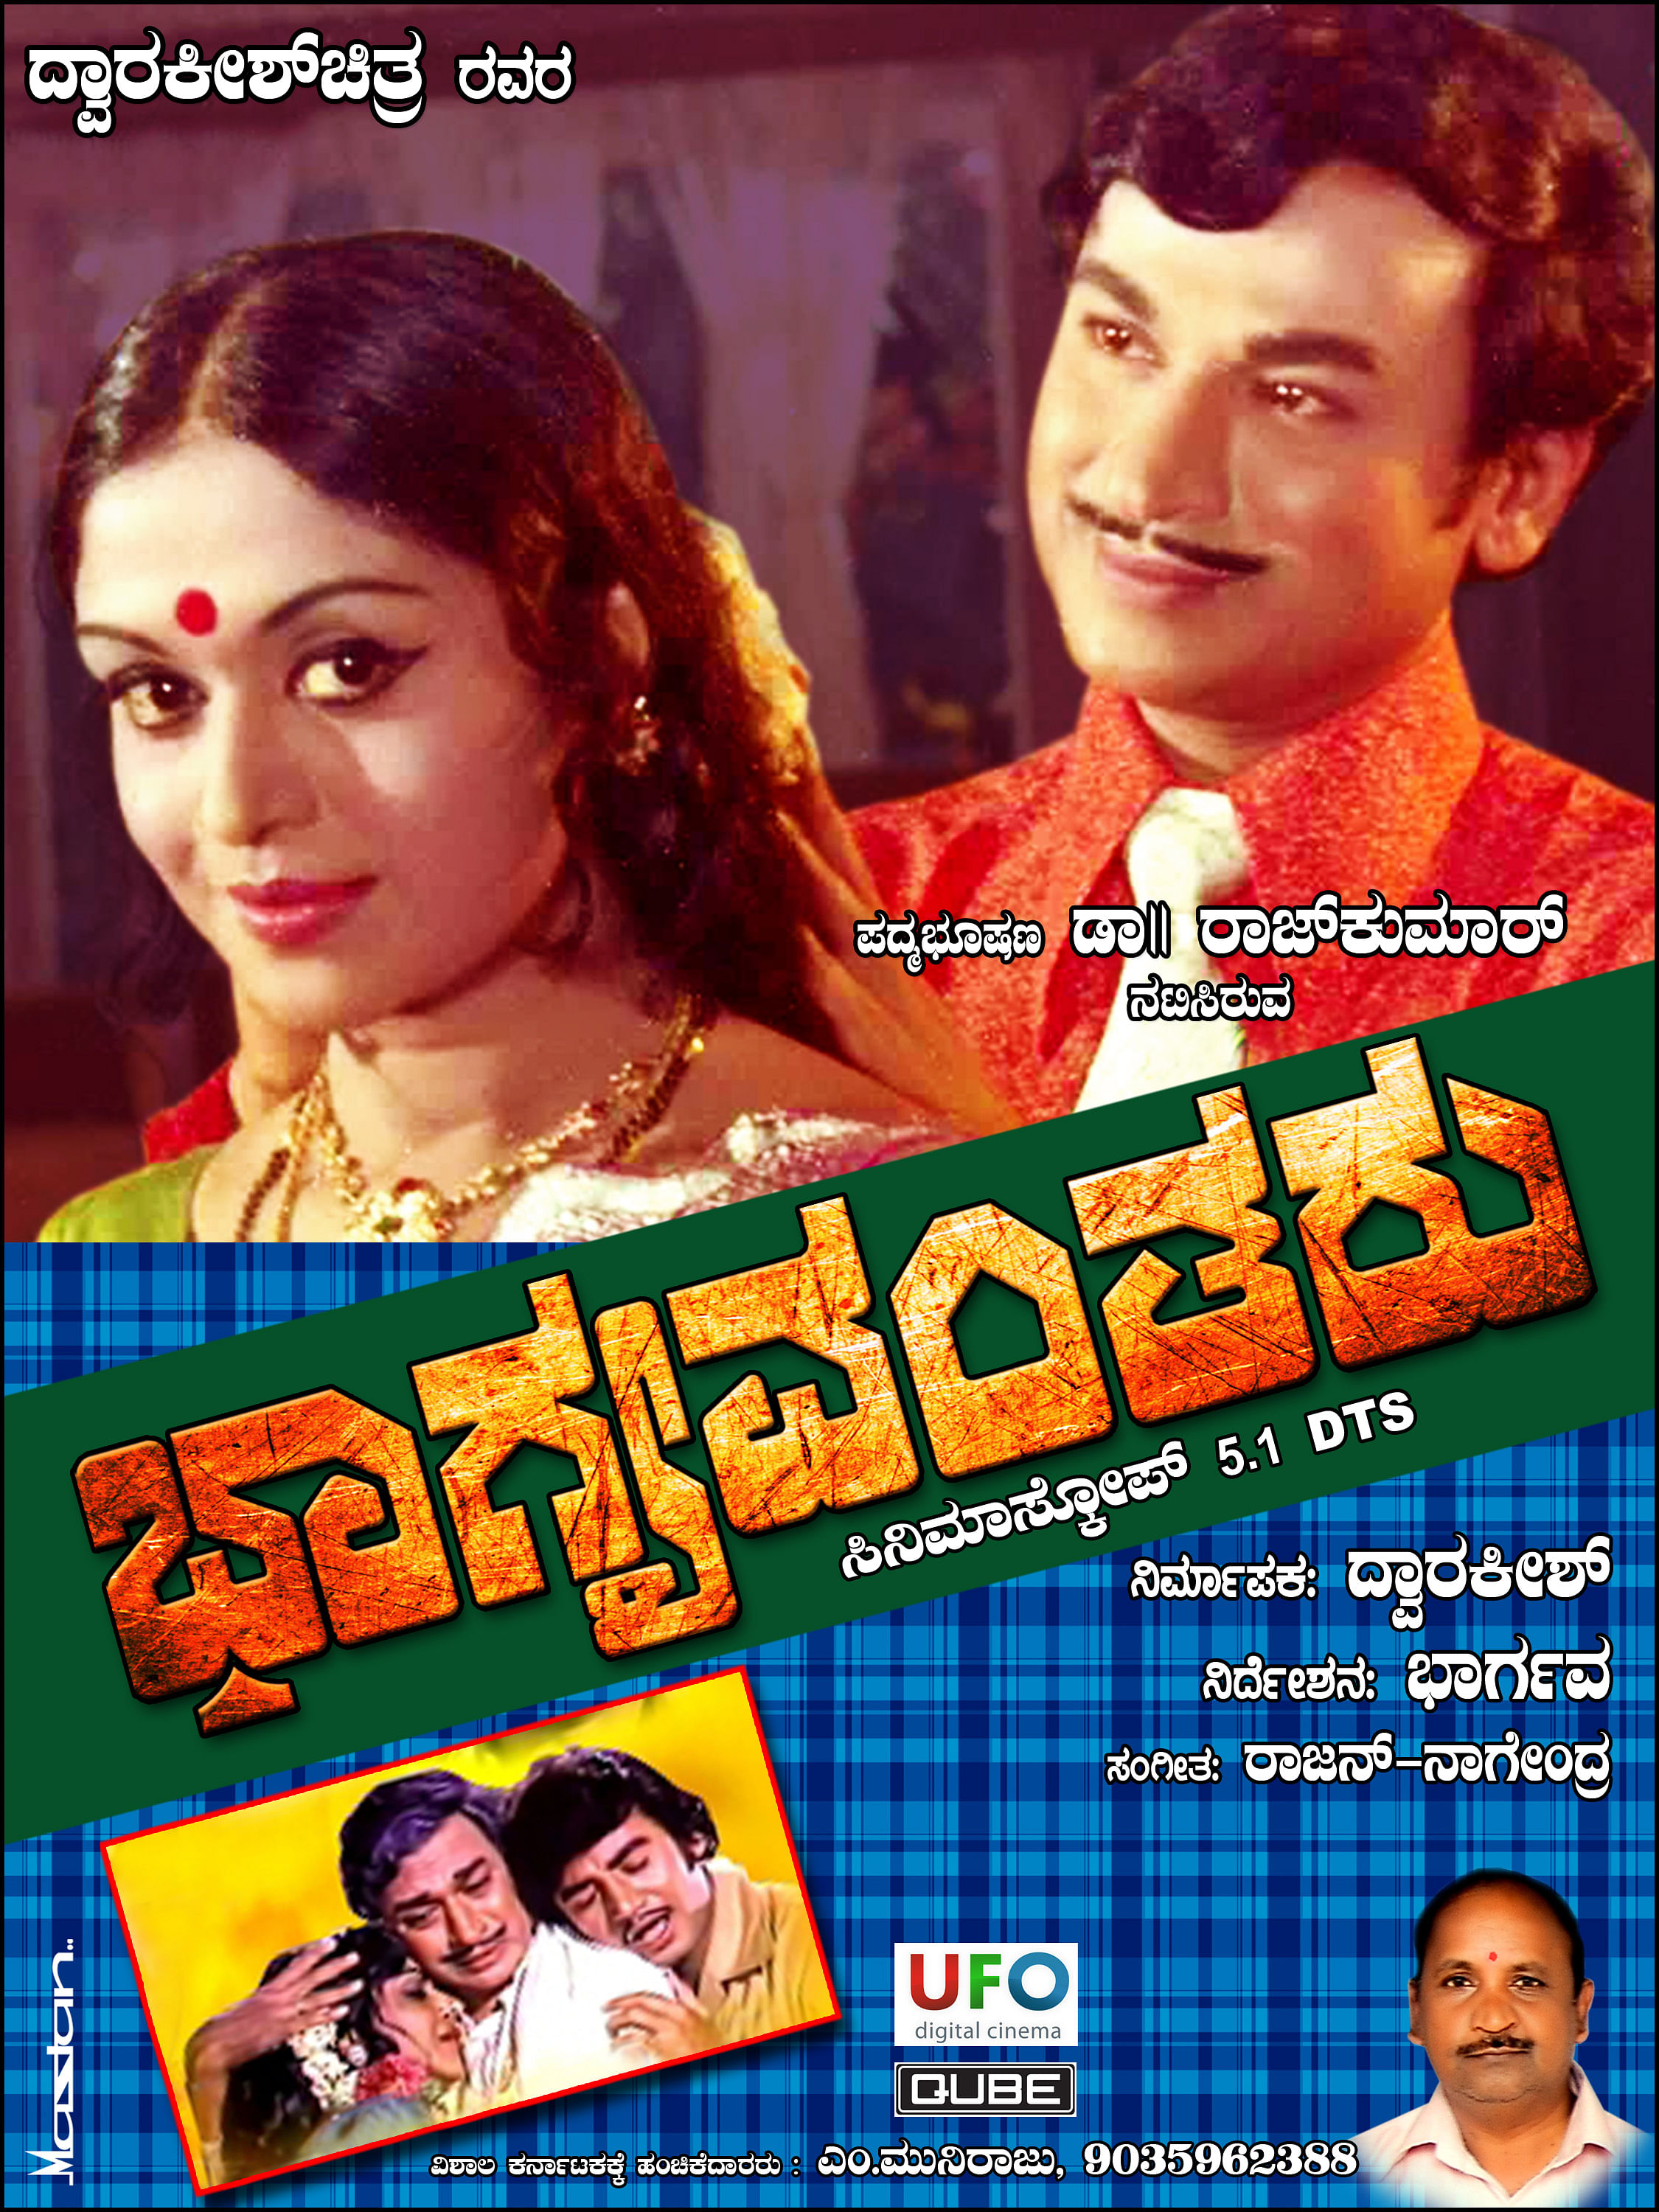 ‘Bhagyavantharu’ stars Rajkumar and B Sarojadevi in the lead. It is about an couple and how they are alienated from their children. 